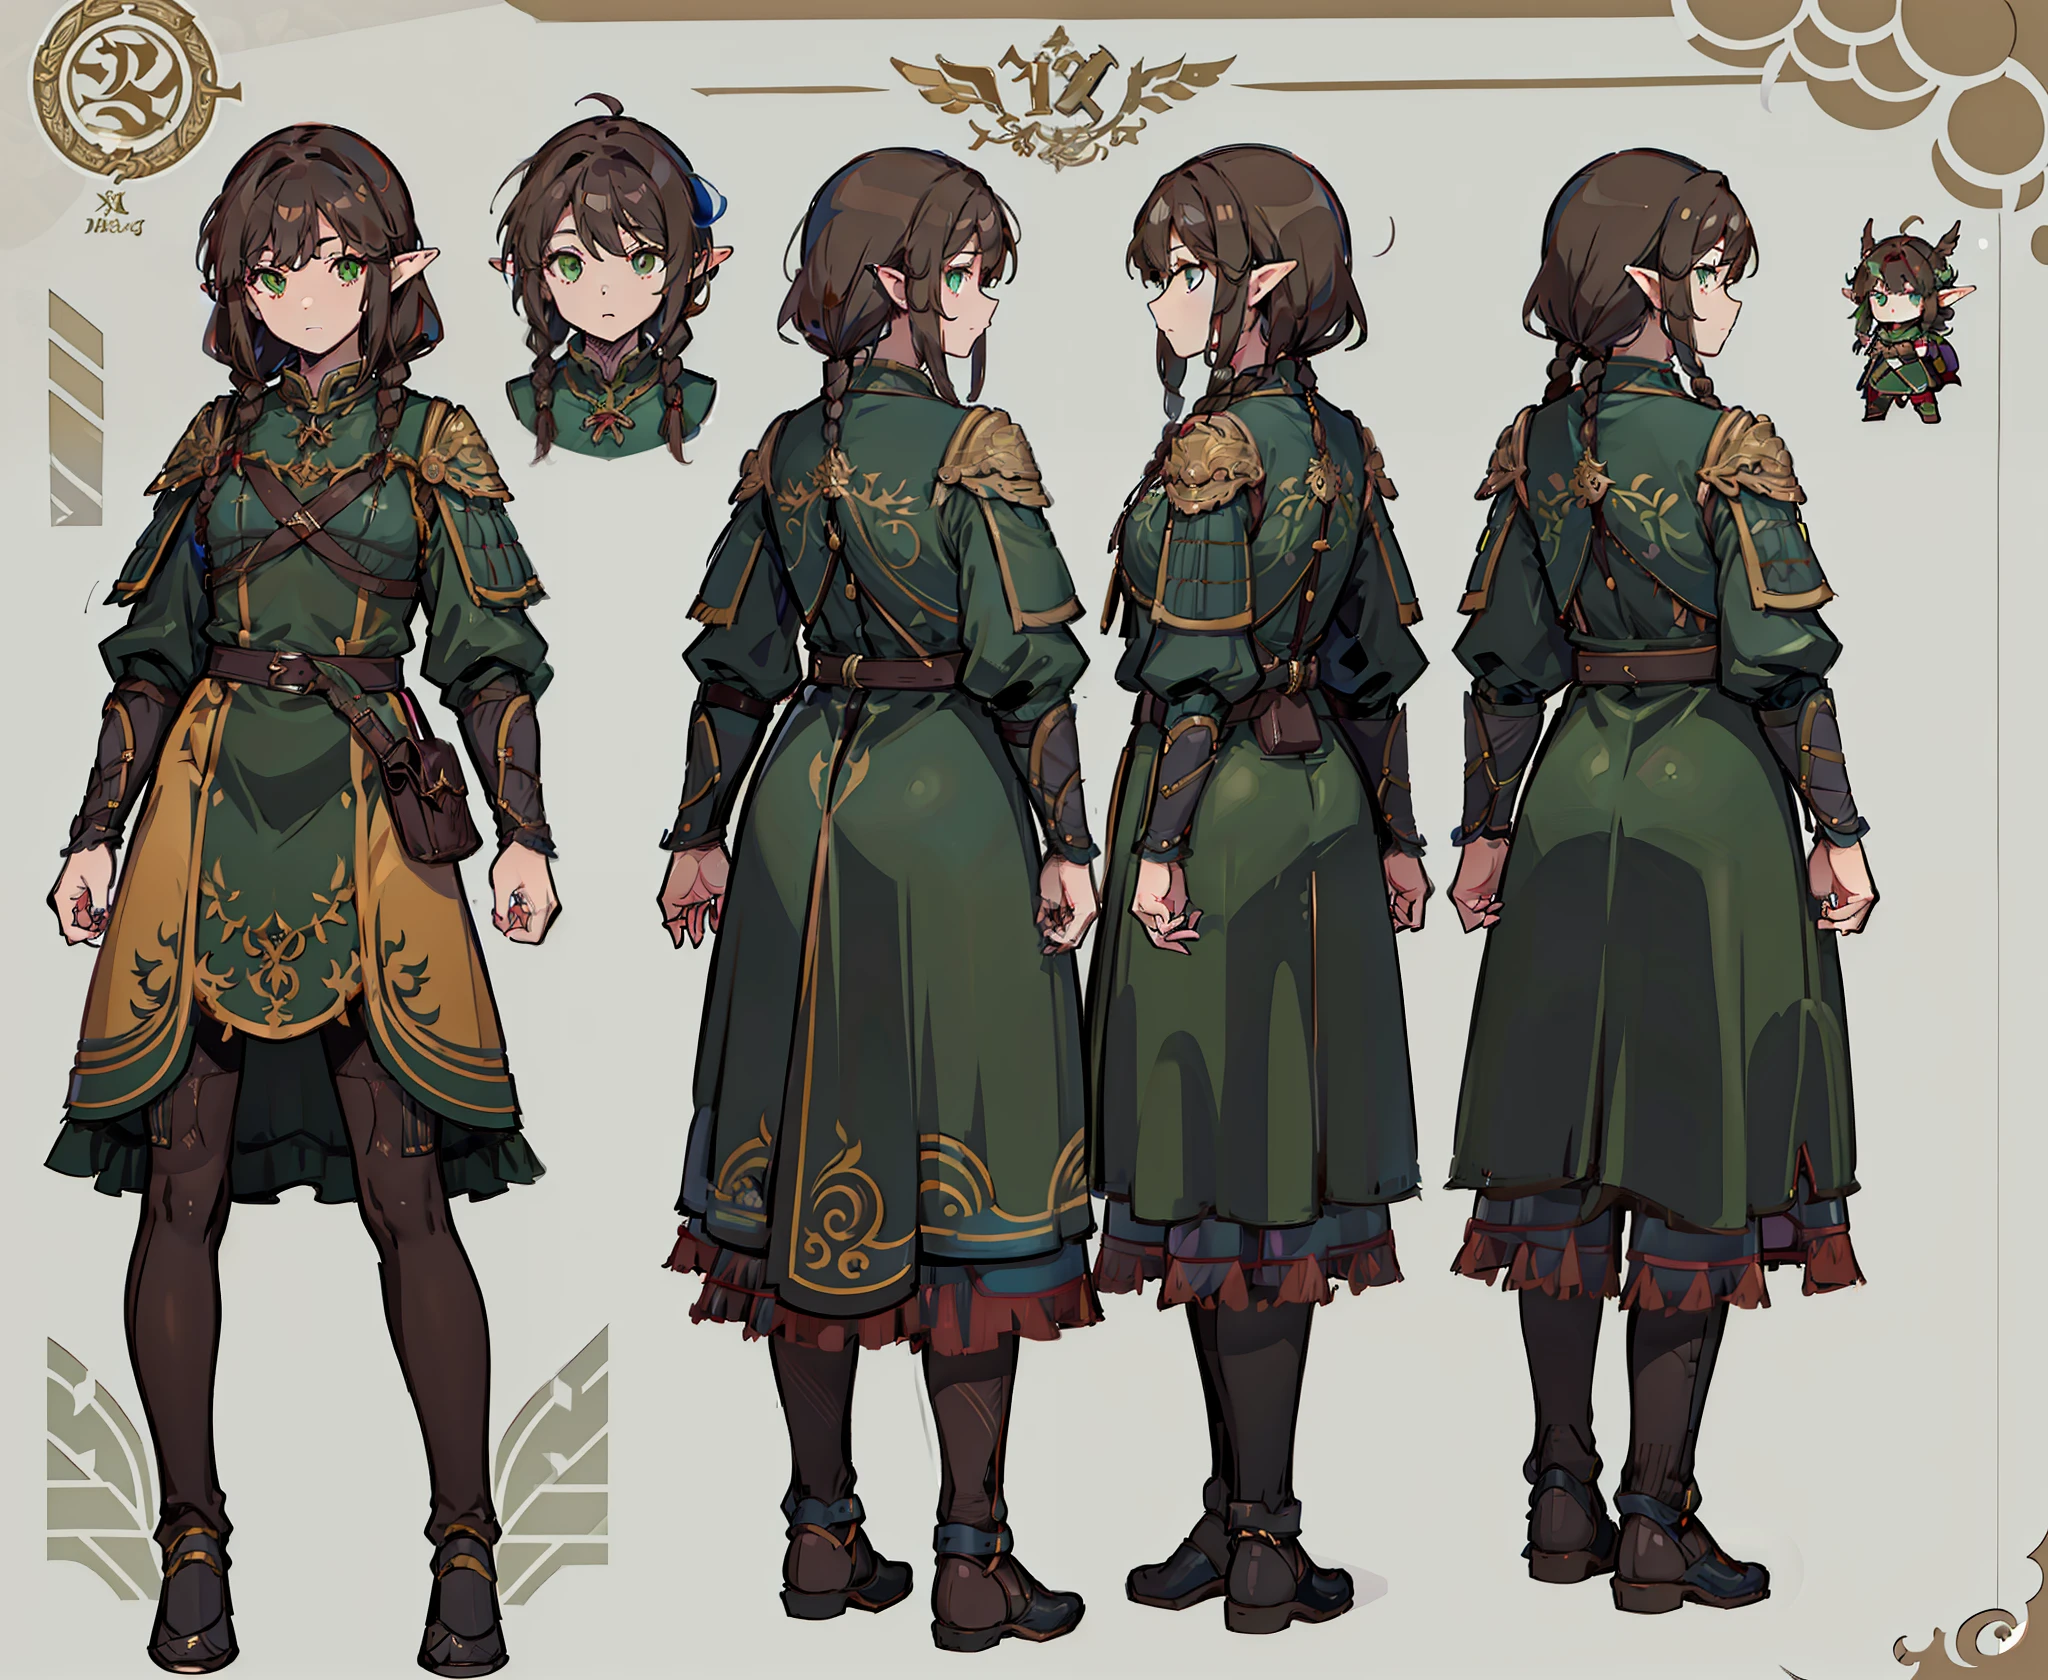 1woman, reference sheet, matching outfits, (fantasy character design, front, back, side, rear) elven ranger. agile body, subtle chest. forest green eyes. flowing long chestnut brown hair, adorned with delicate braids, natural ornaments. lightweight leather armor, elven armor, quiver of arrows.